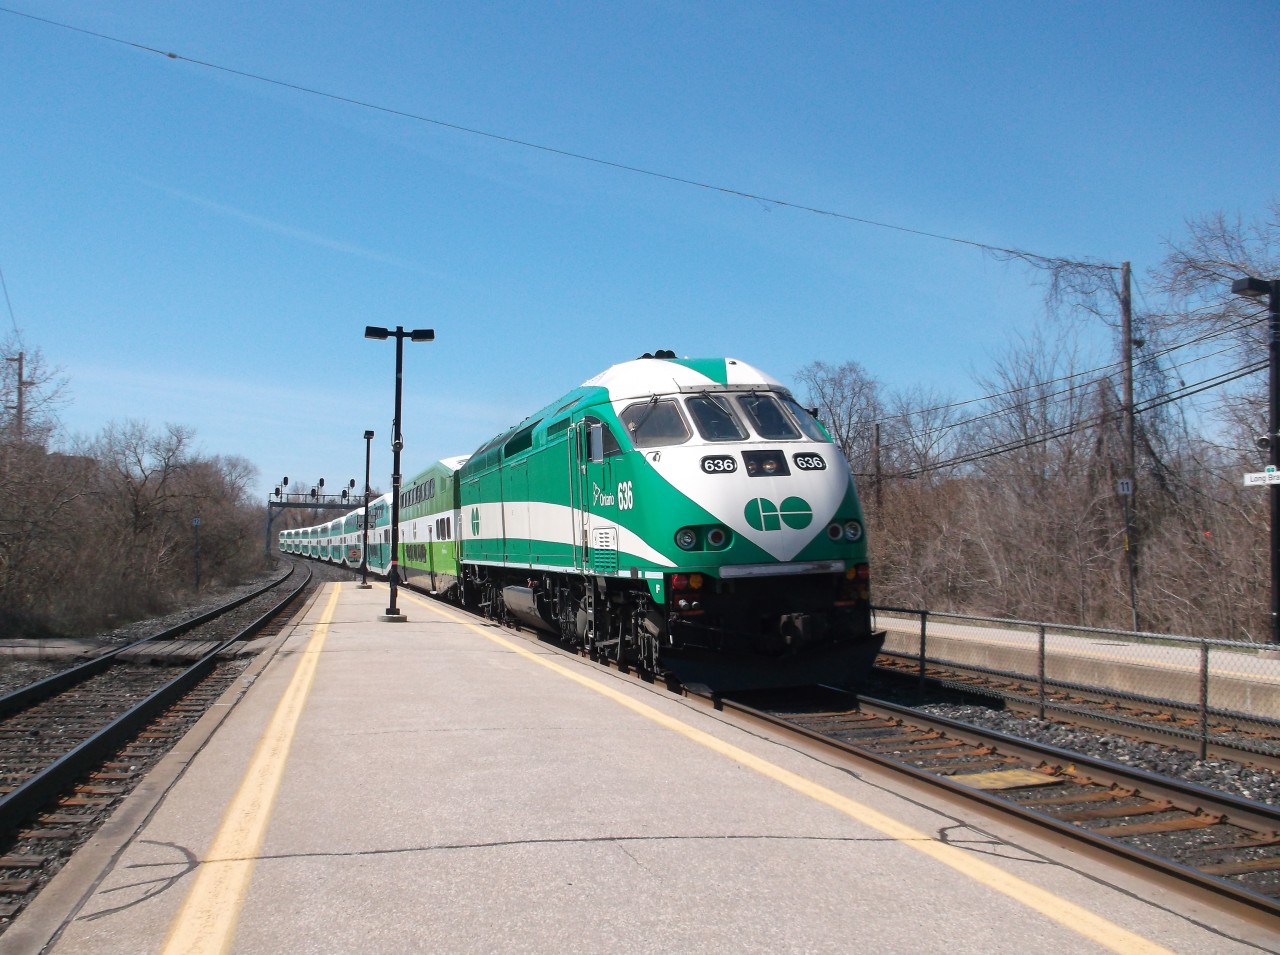 GO Transit MP40PH-3C #636 pulls into Long Branch GO station with an eastbound GO train bound for Oshawa.

#636 is one of 67 MP40PH-3C locomotives on GO Transit's fleet.  It was built in 2009 and the MP40PH-3C is GO Transit's newest locomotive, which was purchased to replace its ageing F59PH fleet.

GO Transit operates double deck coaches, which are built by Bombardier.  The entire fleet (locomotives and coaches) are being repainted in a new paint scheme, which is demonstrated on the first coach.

Long Branch station opened in 1967 as part of GO Transit's Lakeshore Line, which was the first line to be operated by GO Transit.